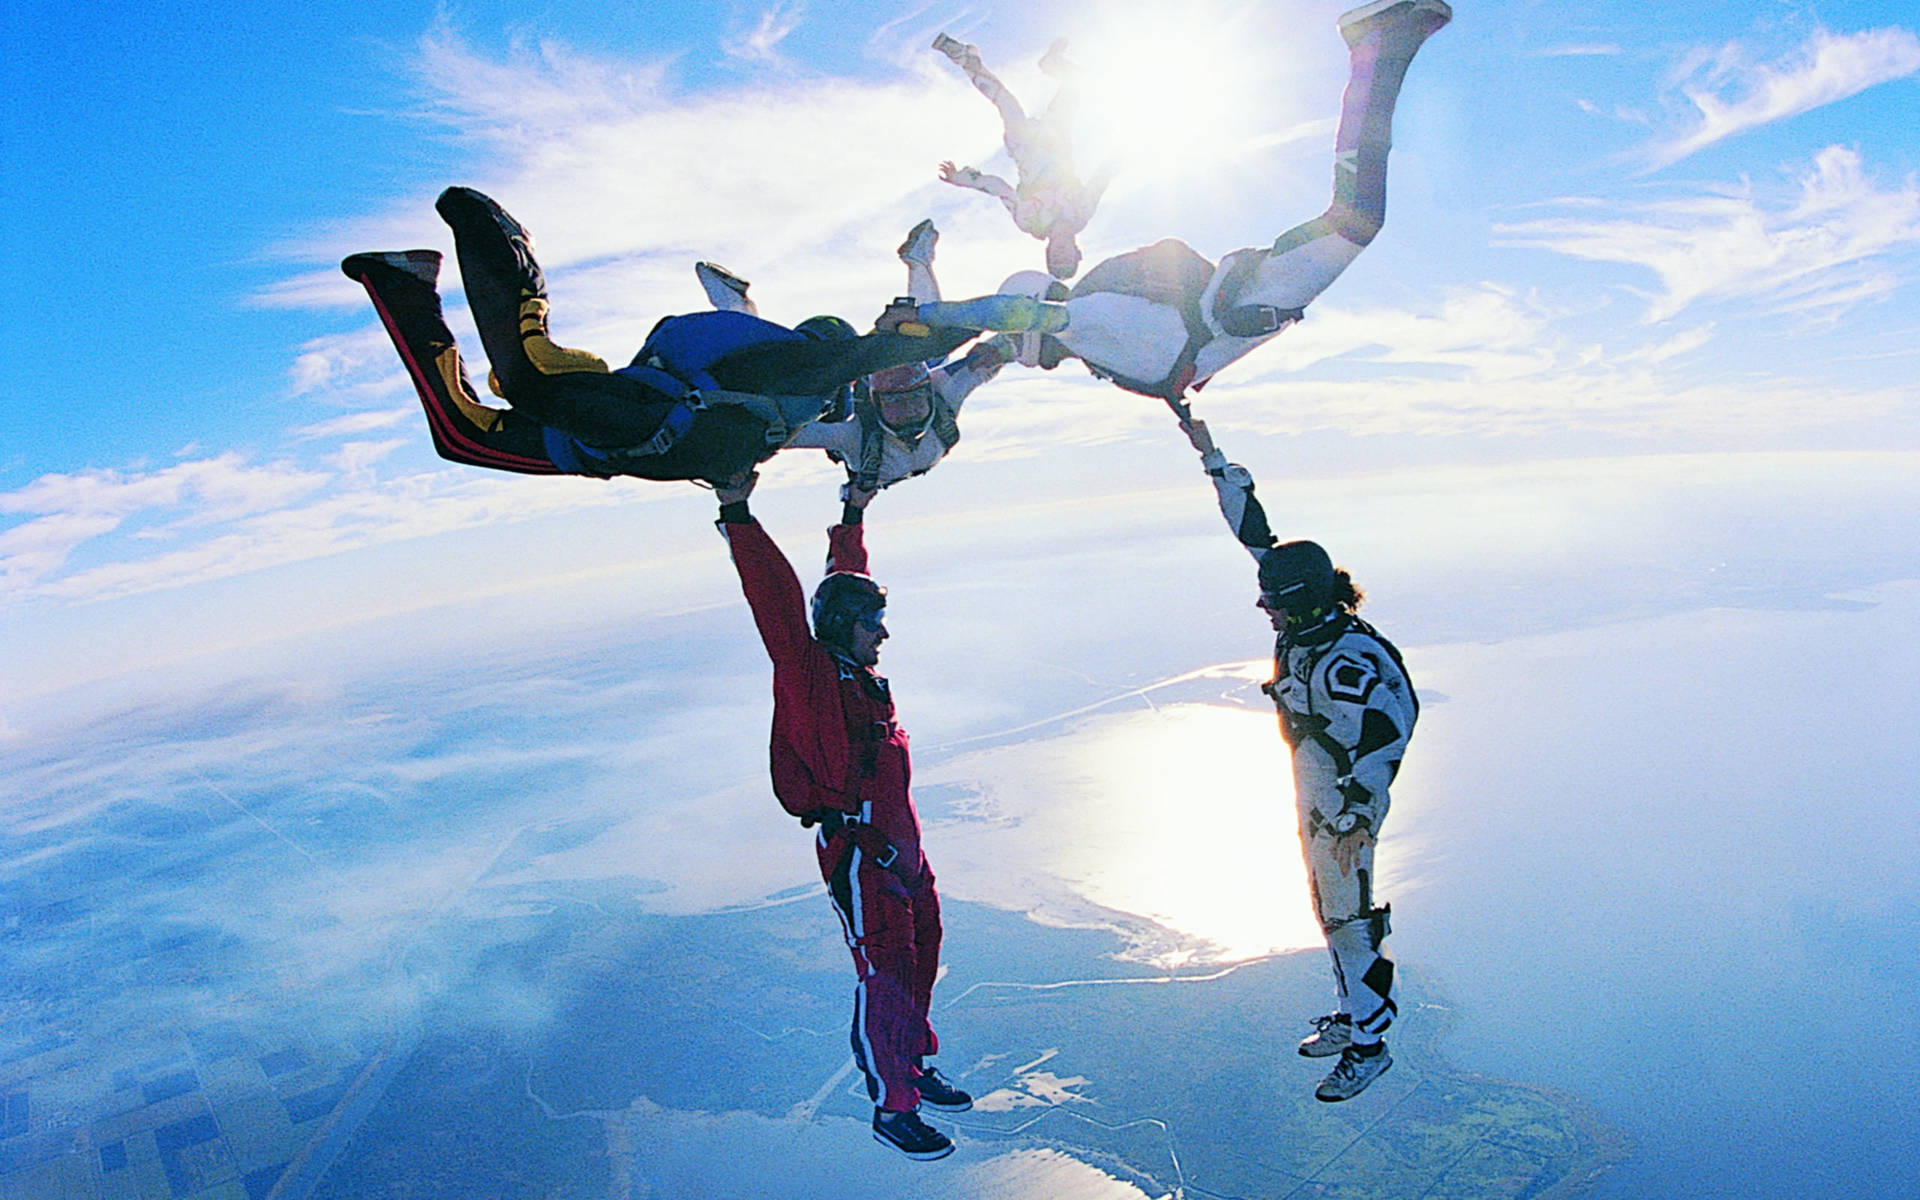 Extreme Sports Formation Skydiving Background